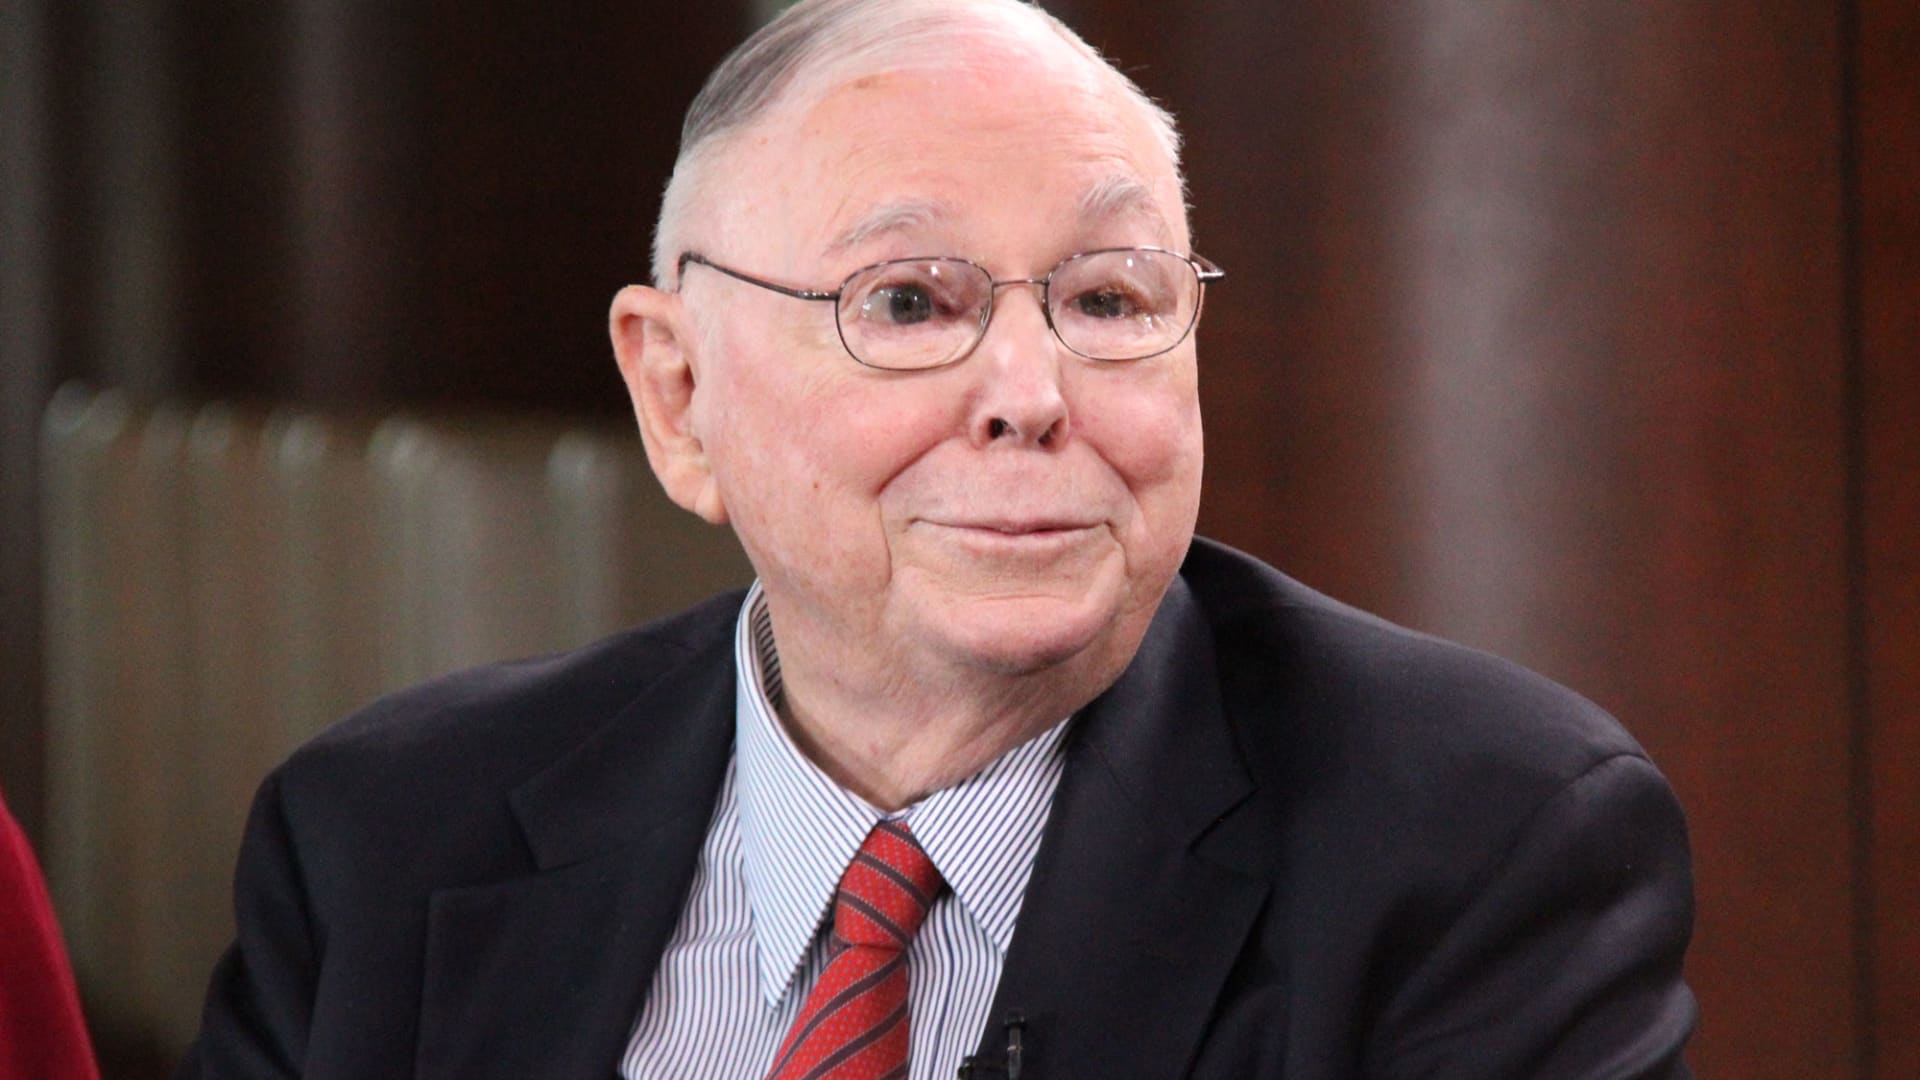 At 99, billionaire Charlie Munger shared his No. 1 tip for living a long, happy life: 'Avoid crazy at all costs'